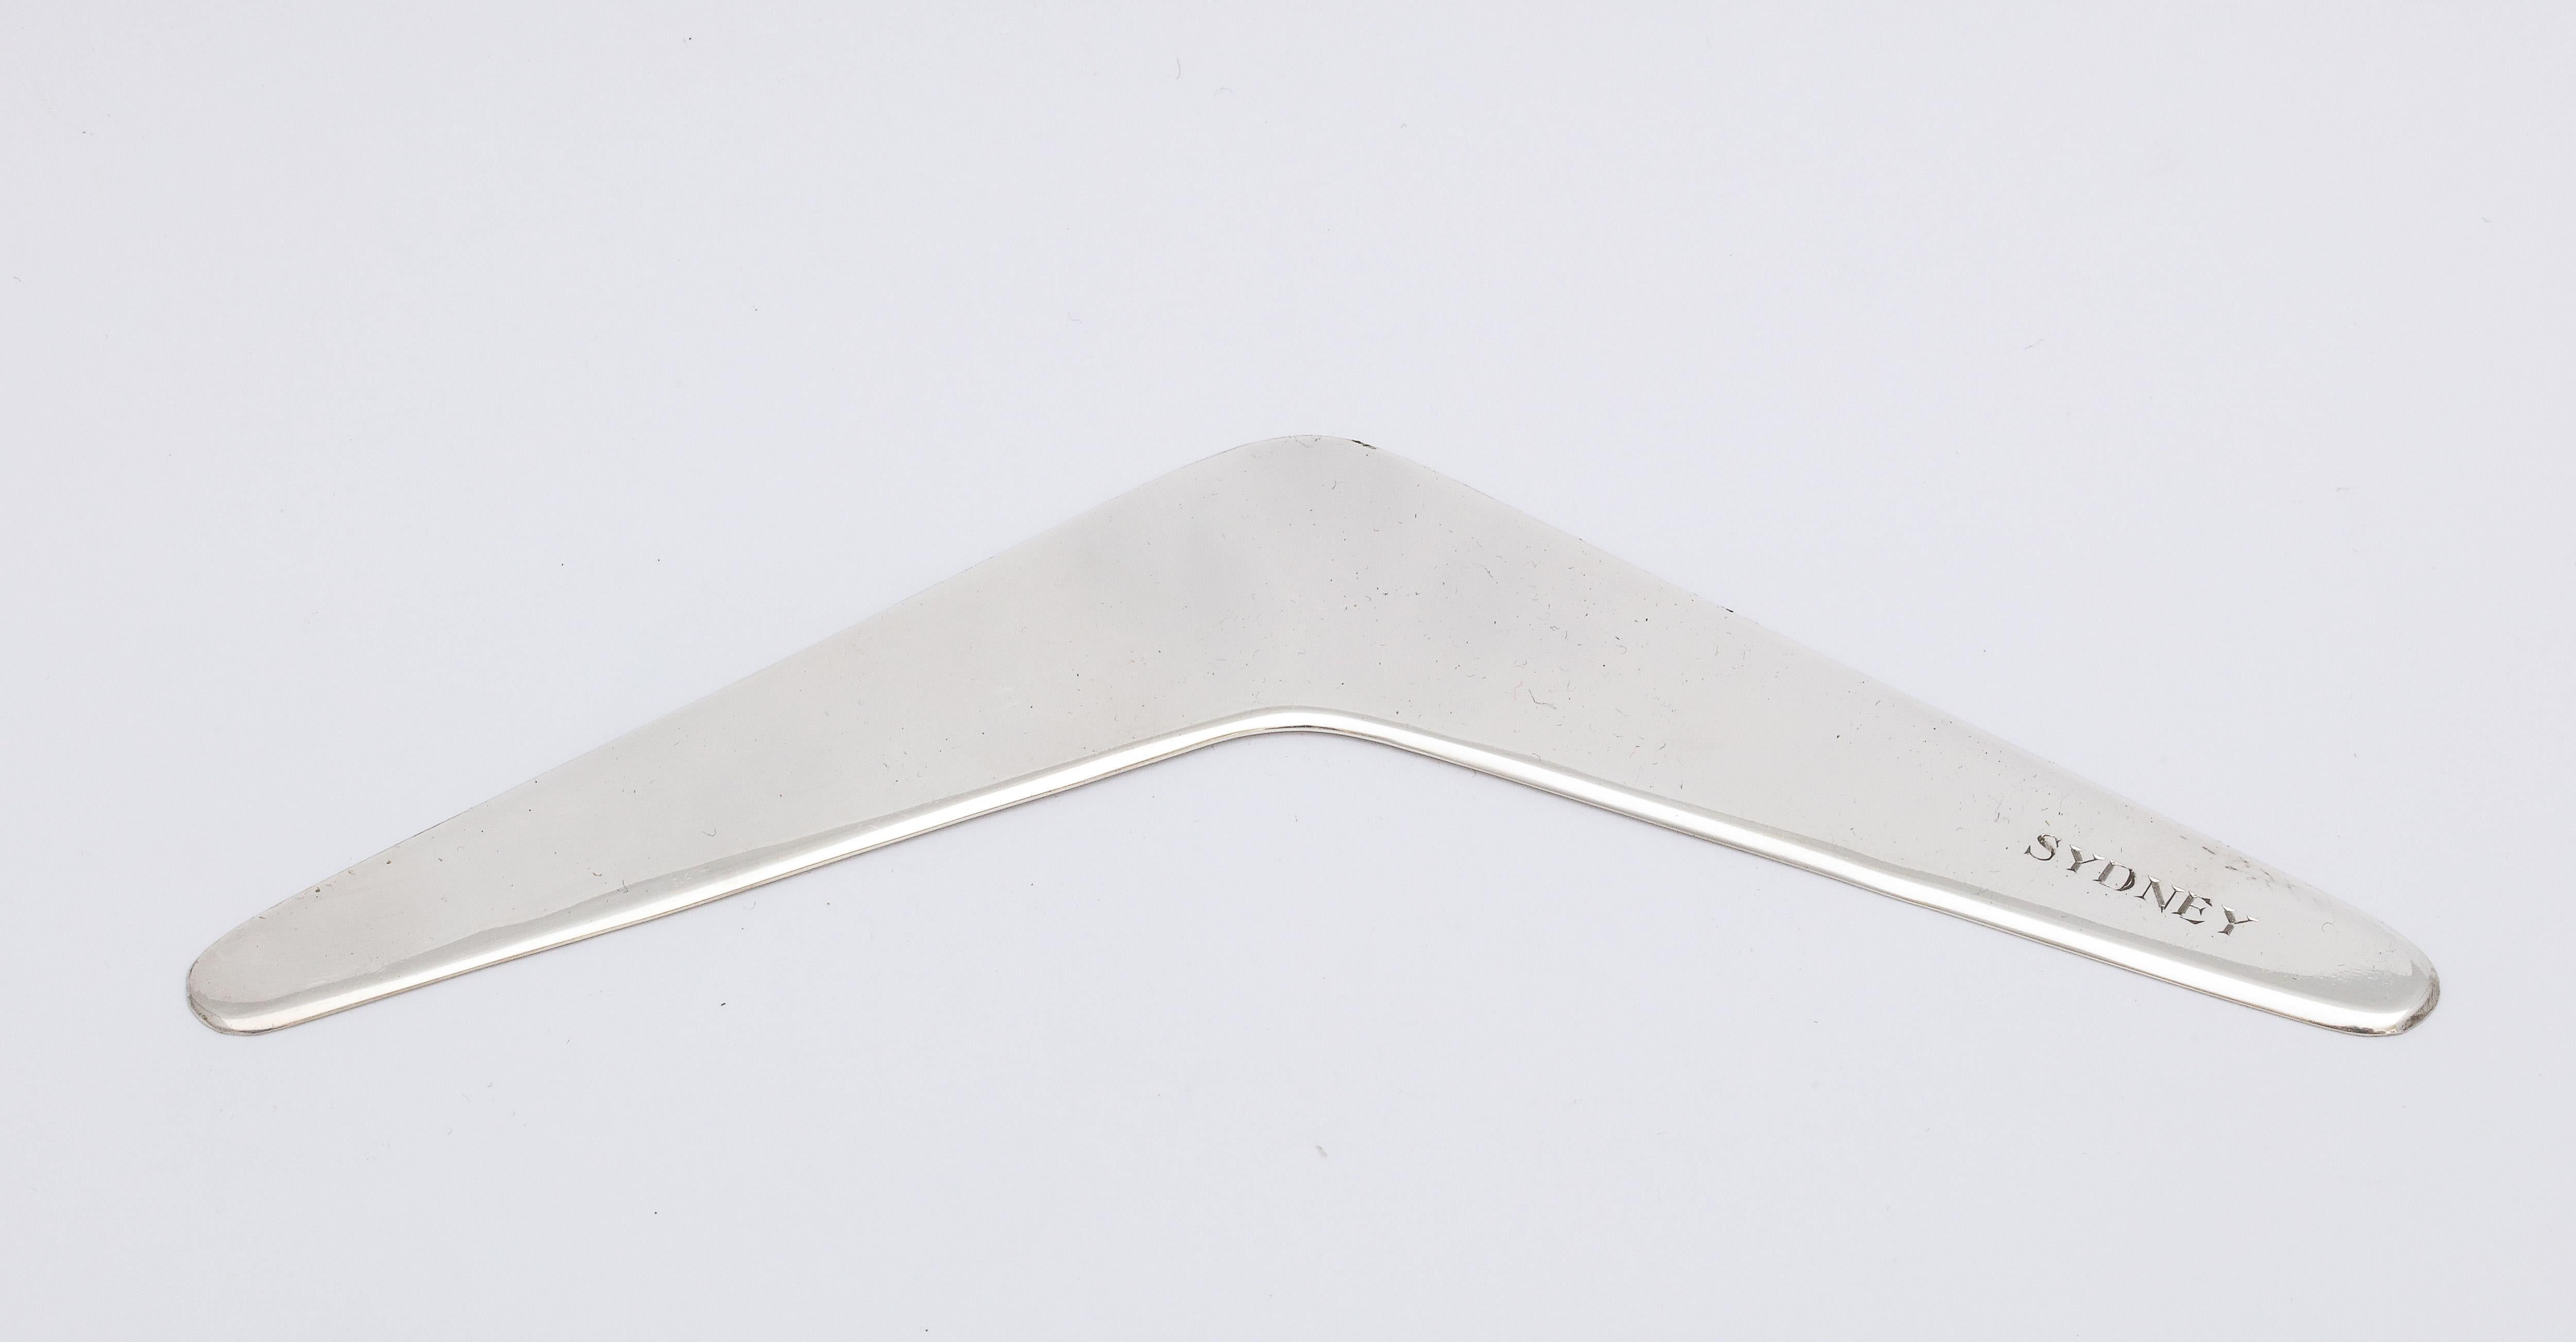 Mid-Century Modern, sterling silver boomerang, Australia, circa 1950s, Britannic - maker. Measures 6 inches from end to end x 1 1/8 inches deep at deepest point x 1/23 of an inch high when lying flat; weighs 0.920 troy ounces. Inscribed SYDNEY in